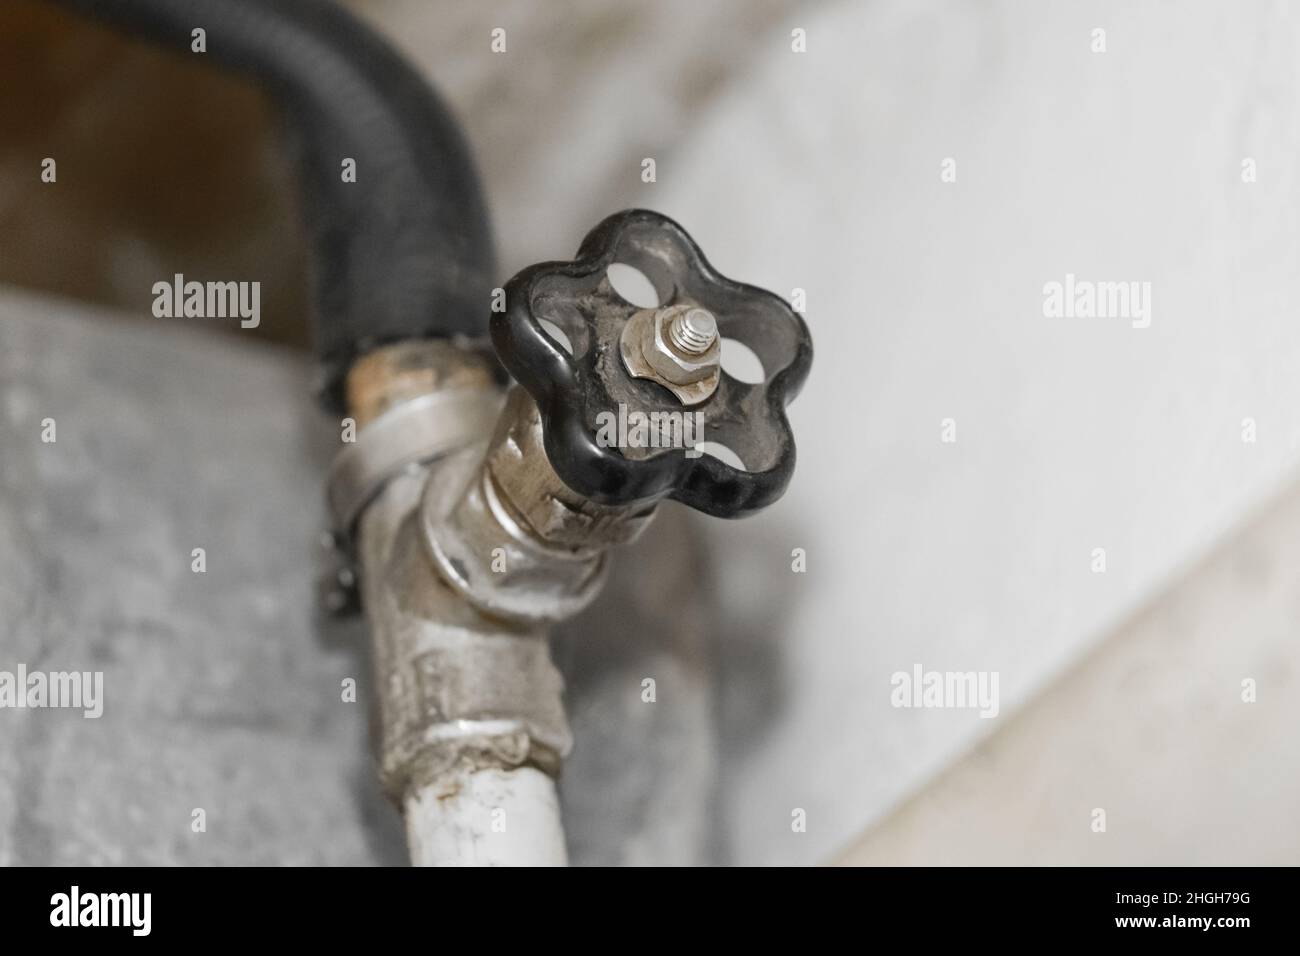 Valve Old Water Steel Pipe System Control. Stock Photo